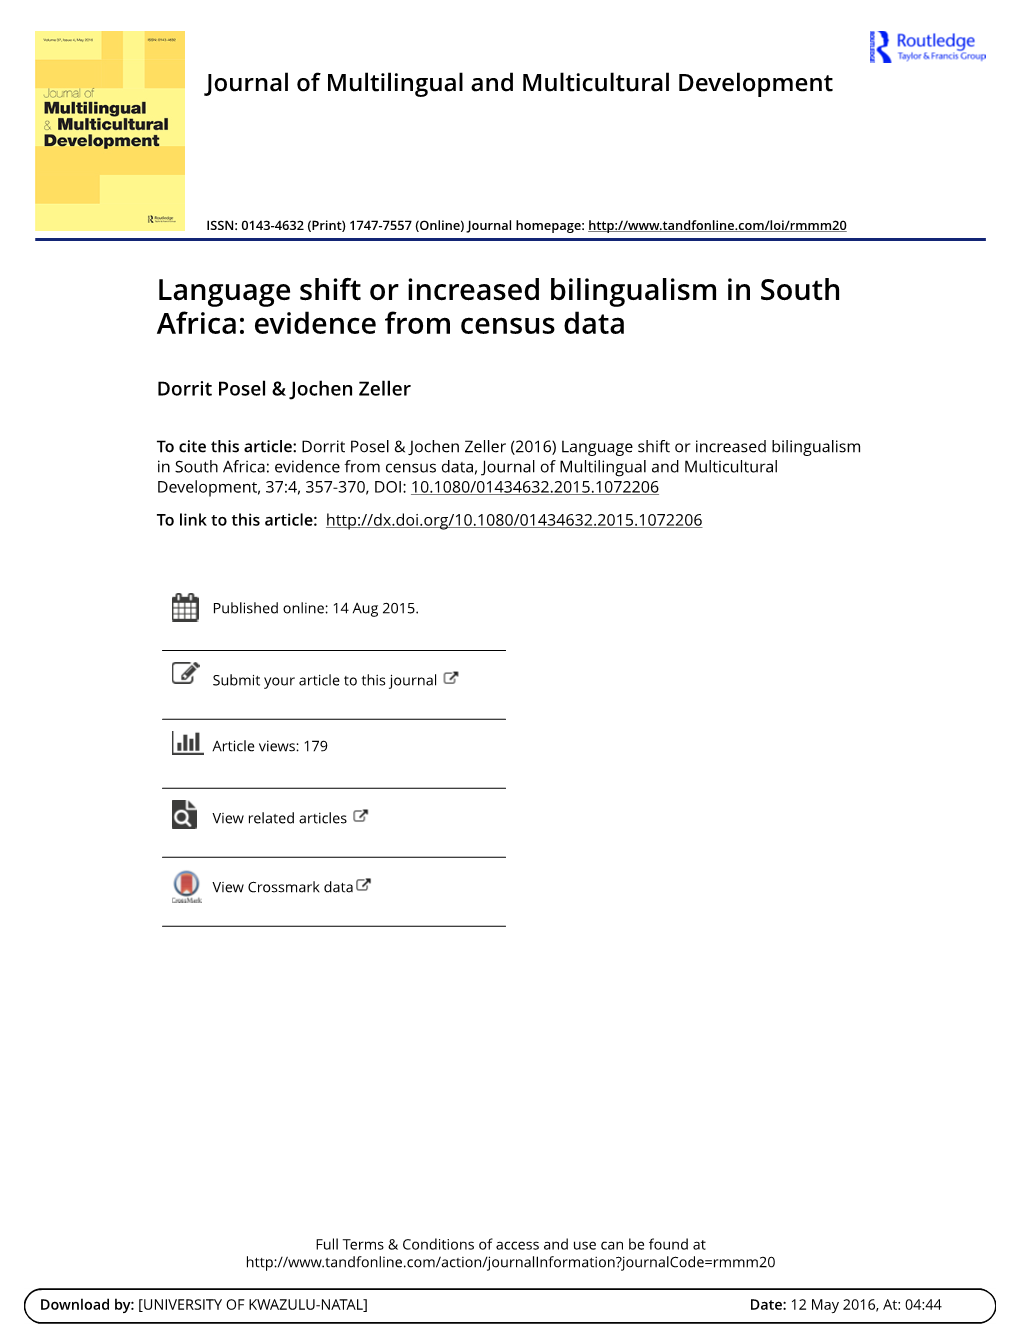 Language Shift Or Increased Bilingualism in South Africa: Evidence from Census Data